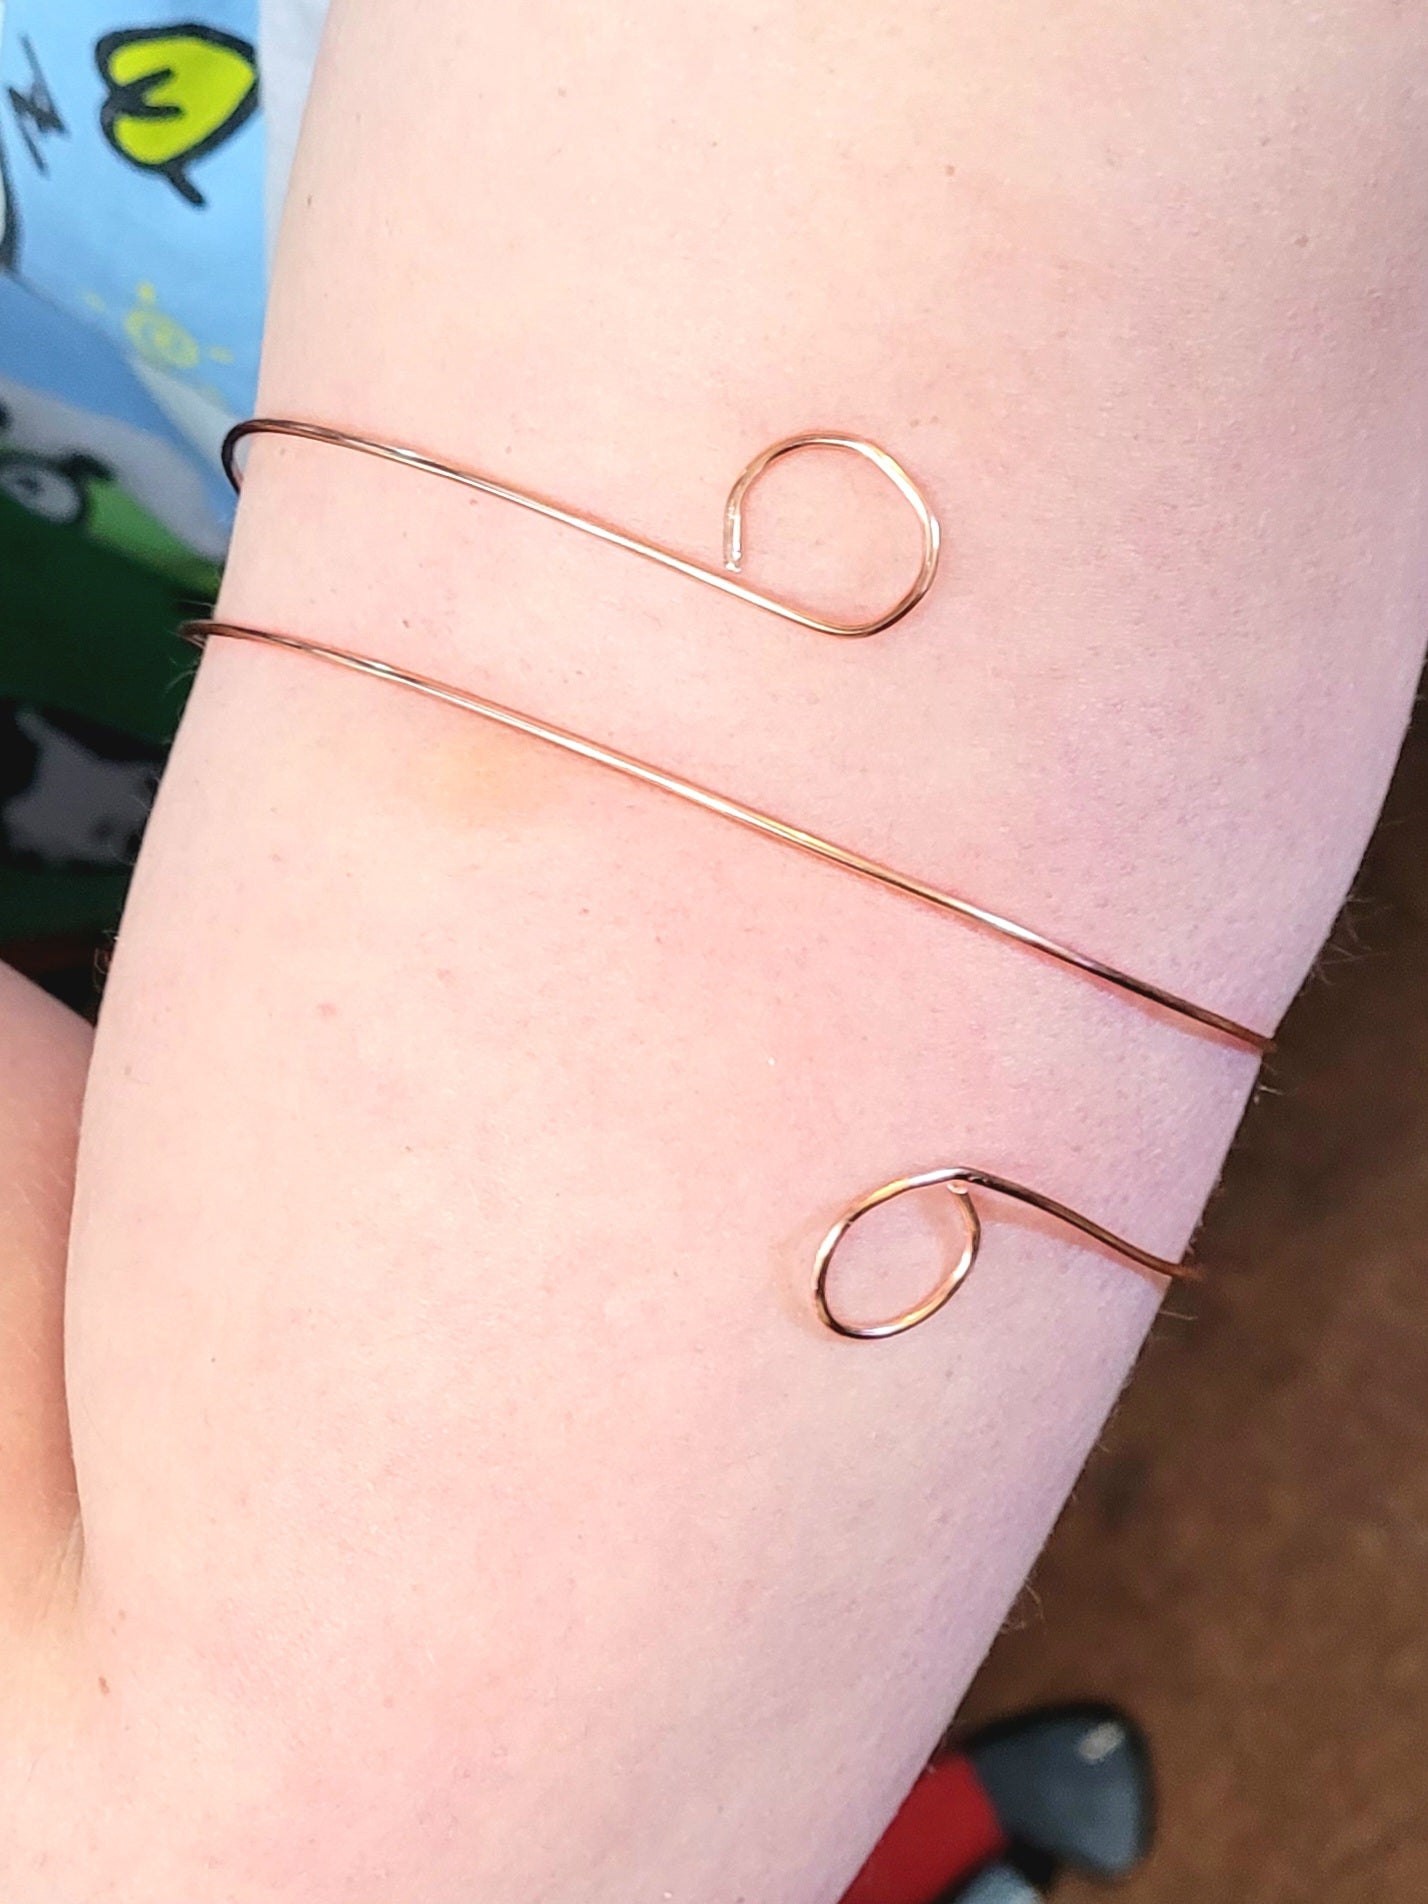 Copper Arm Band